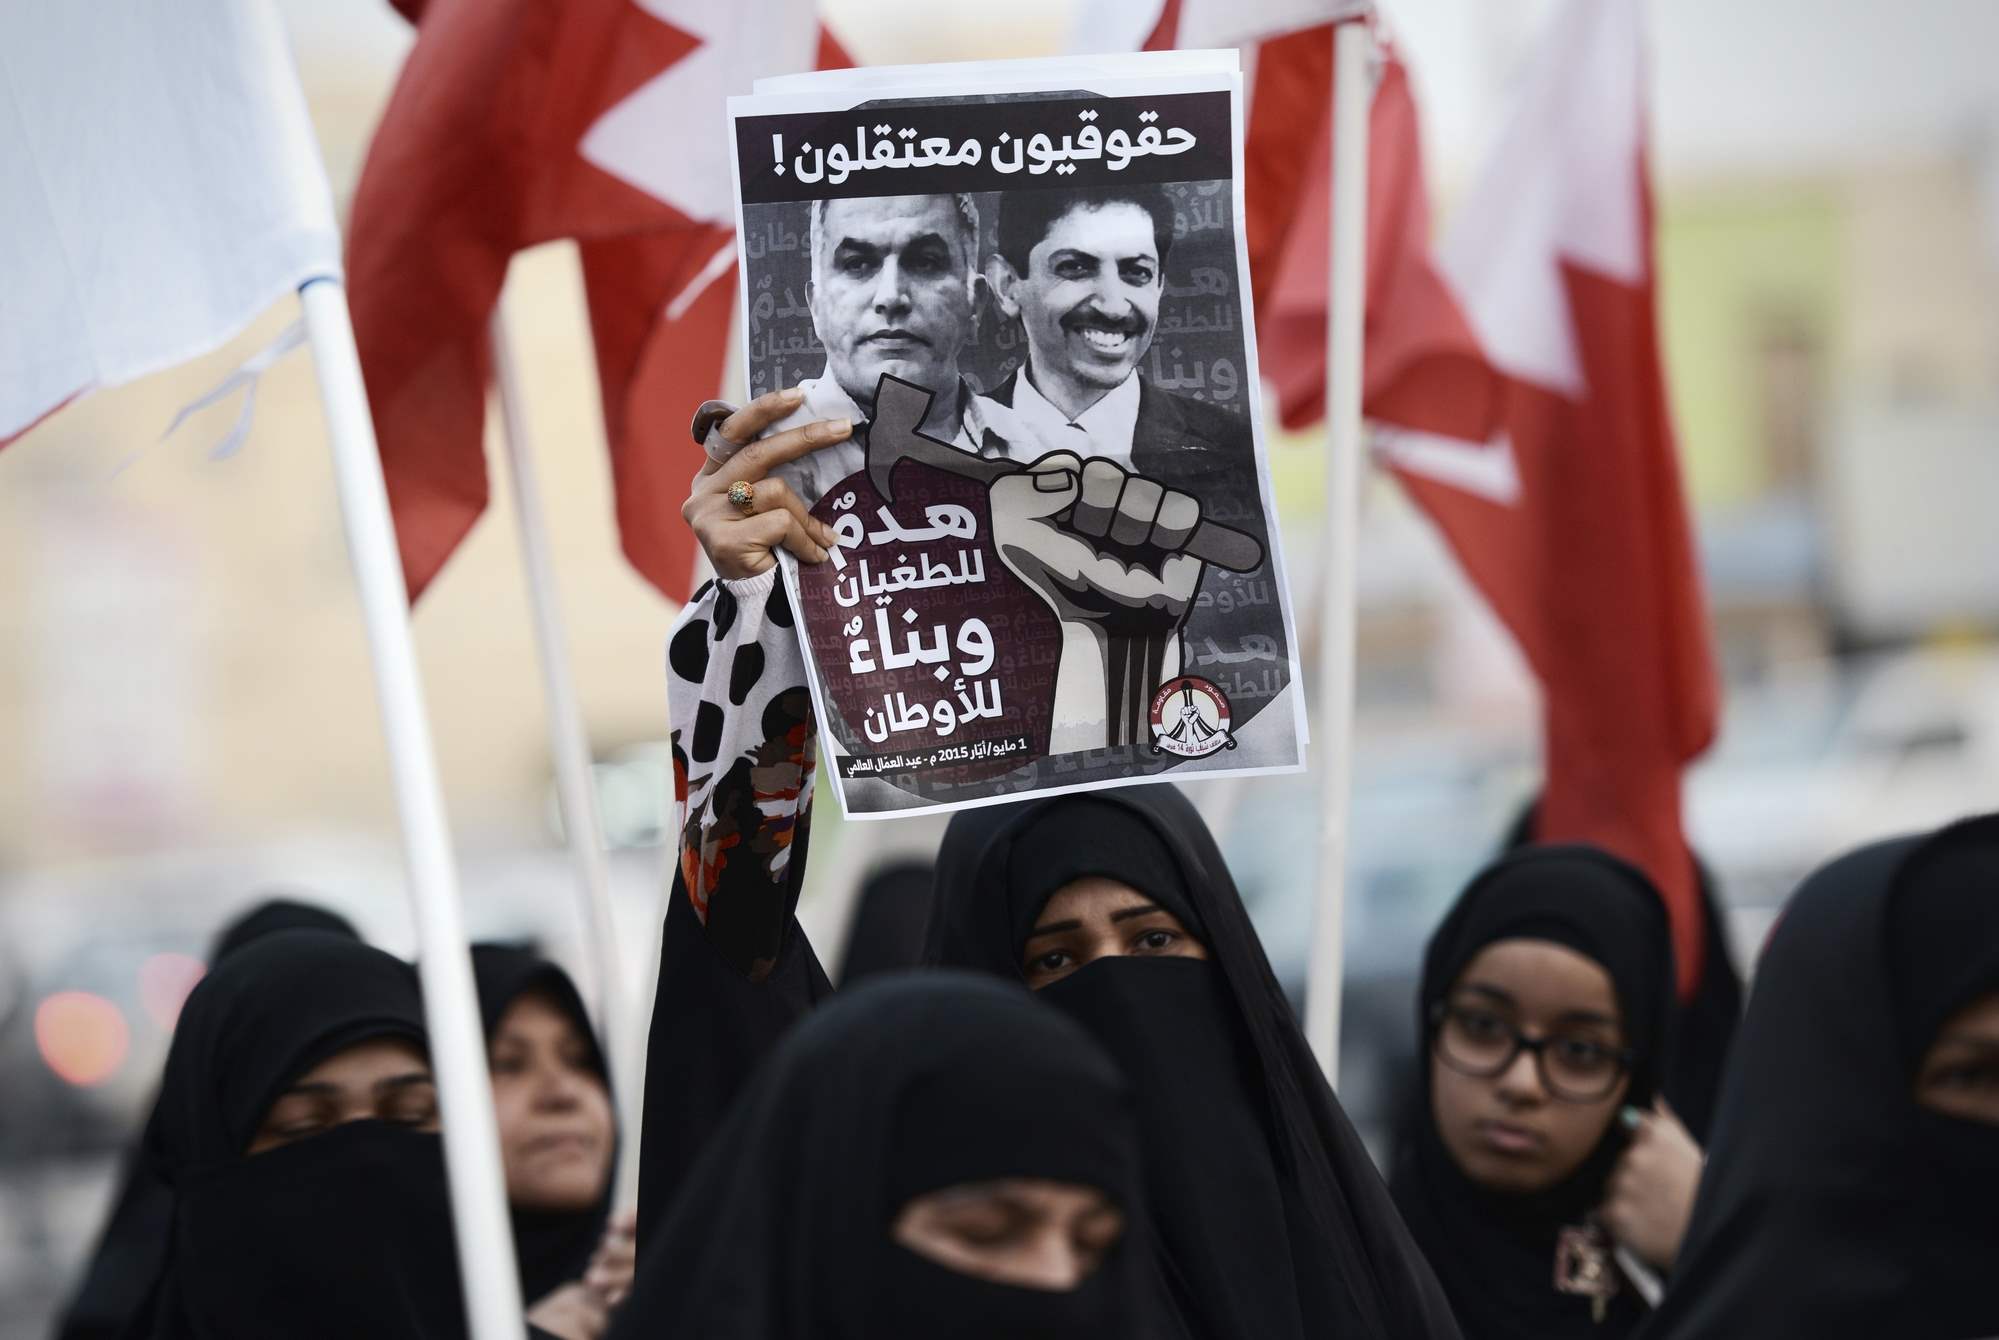 People wearing black hijabs and niqabs, demonstrate in the street for human rights activist Nabeel Rajab.